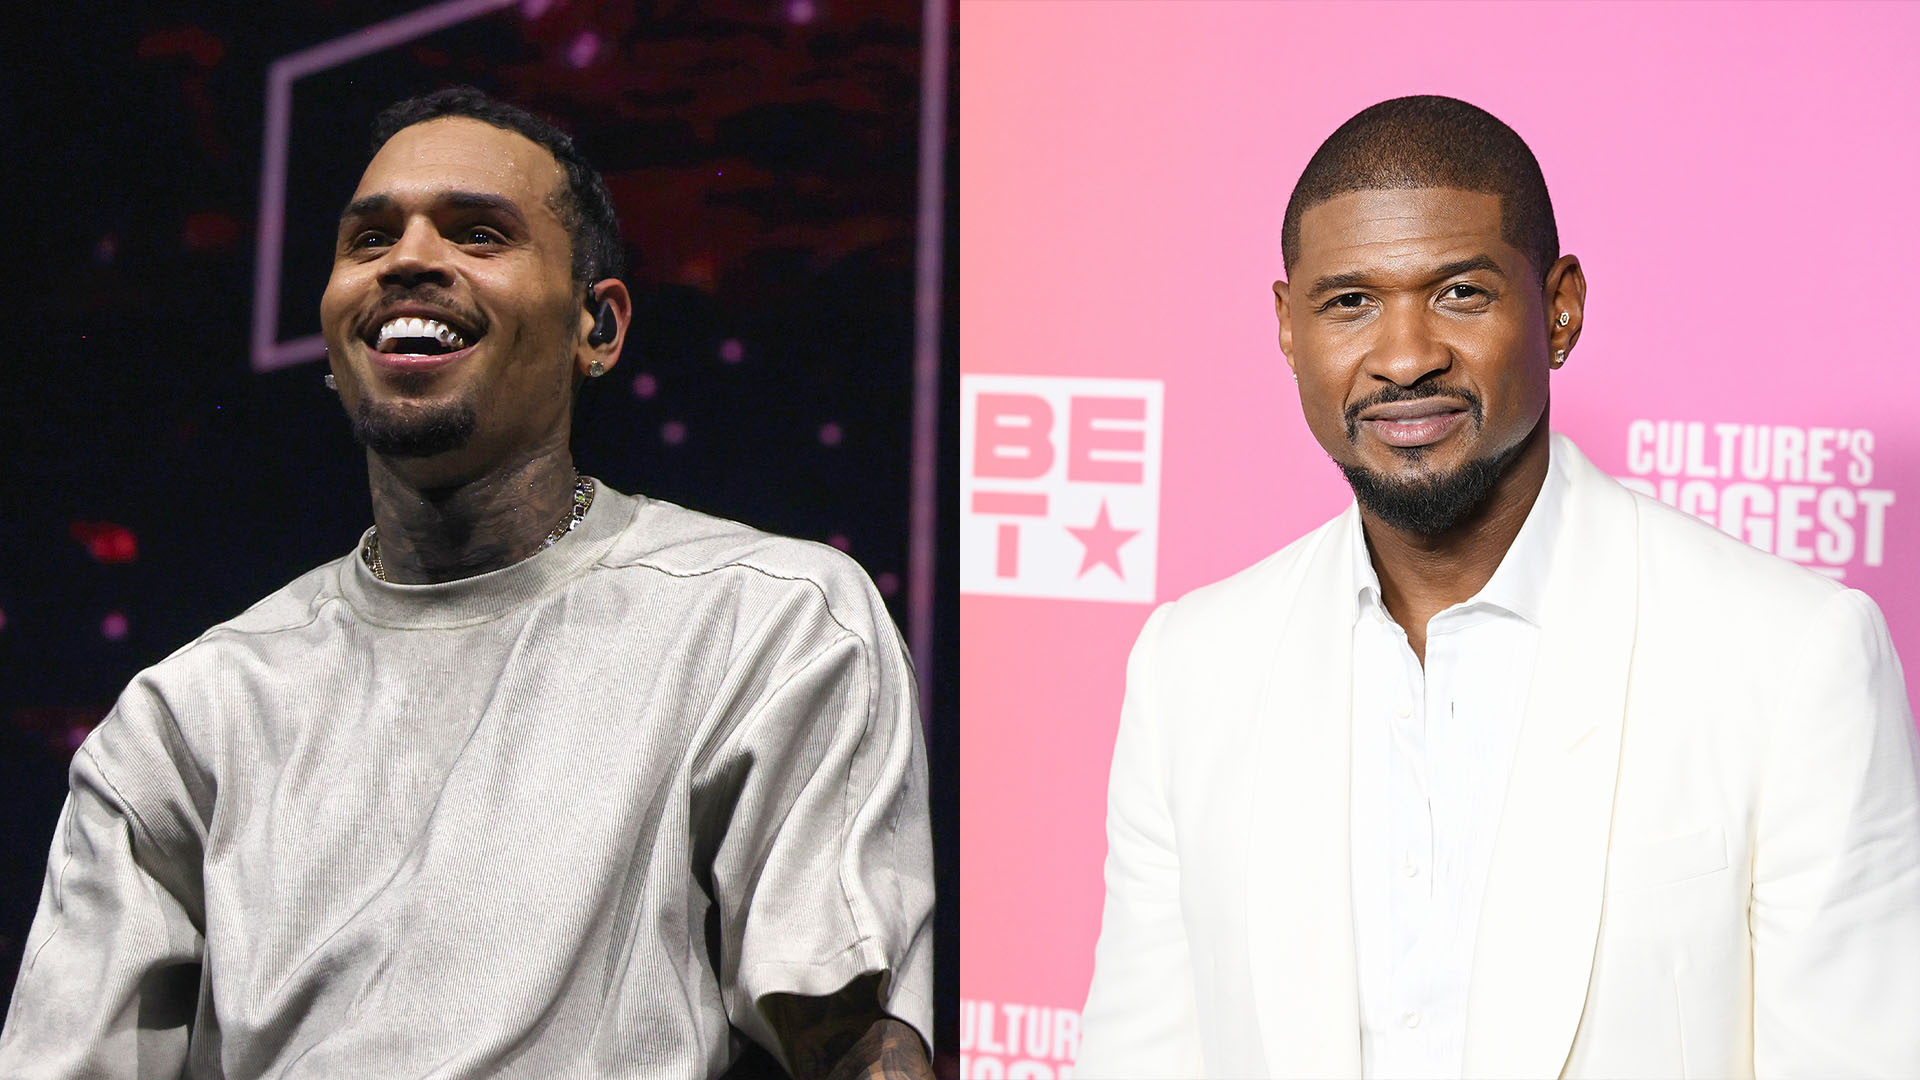 Social media reactions to Chris Brown jamming to Usher’s music